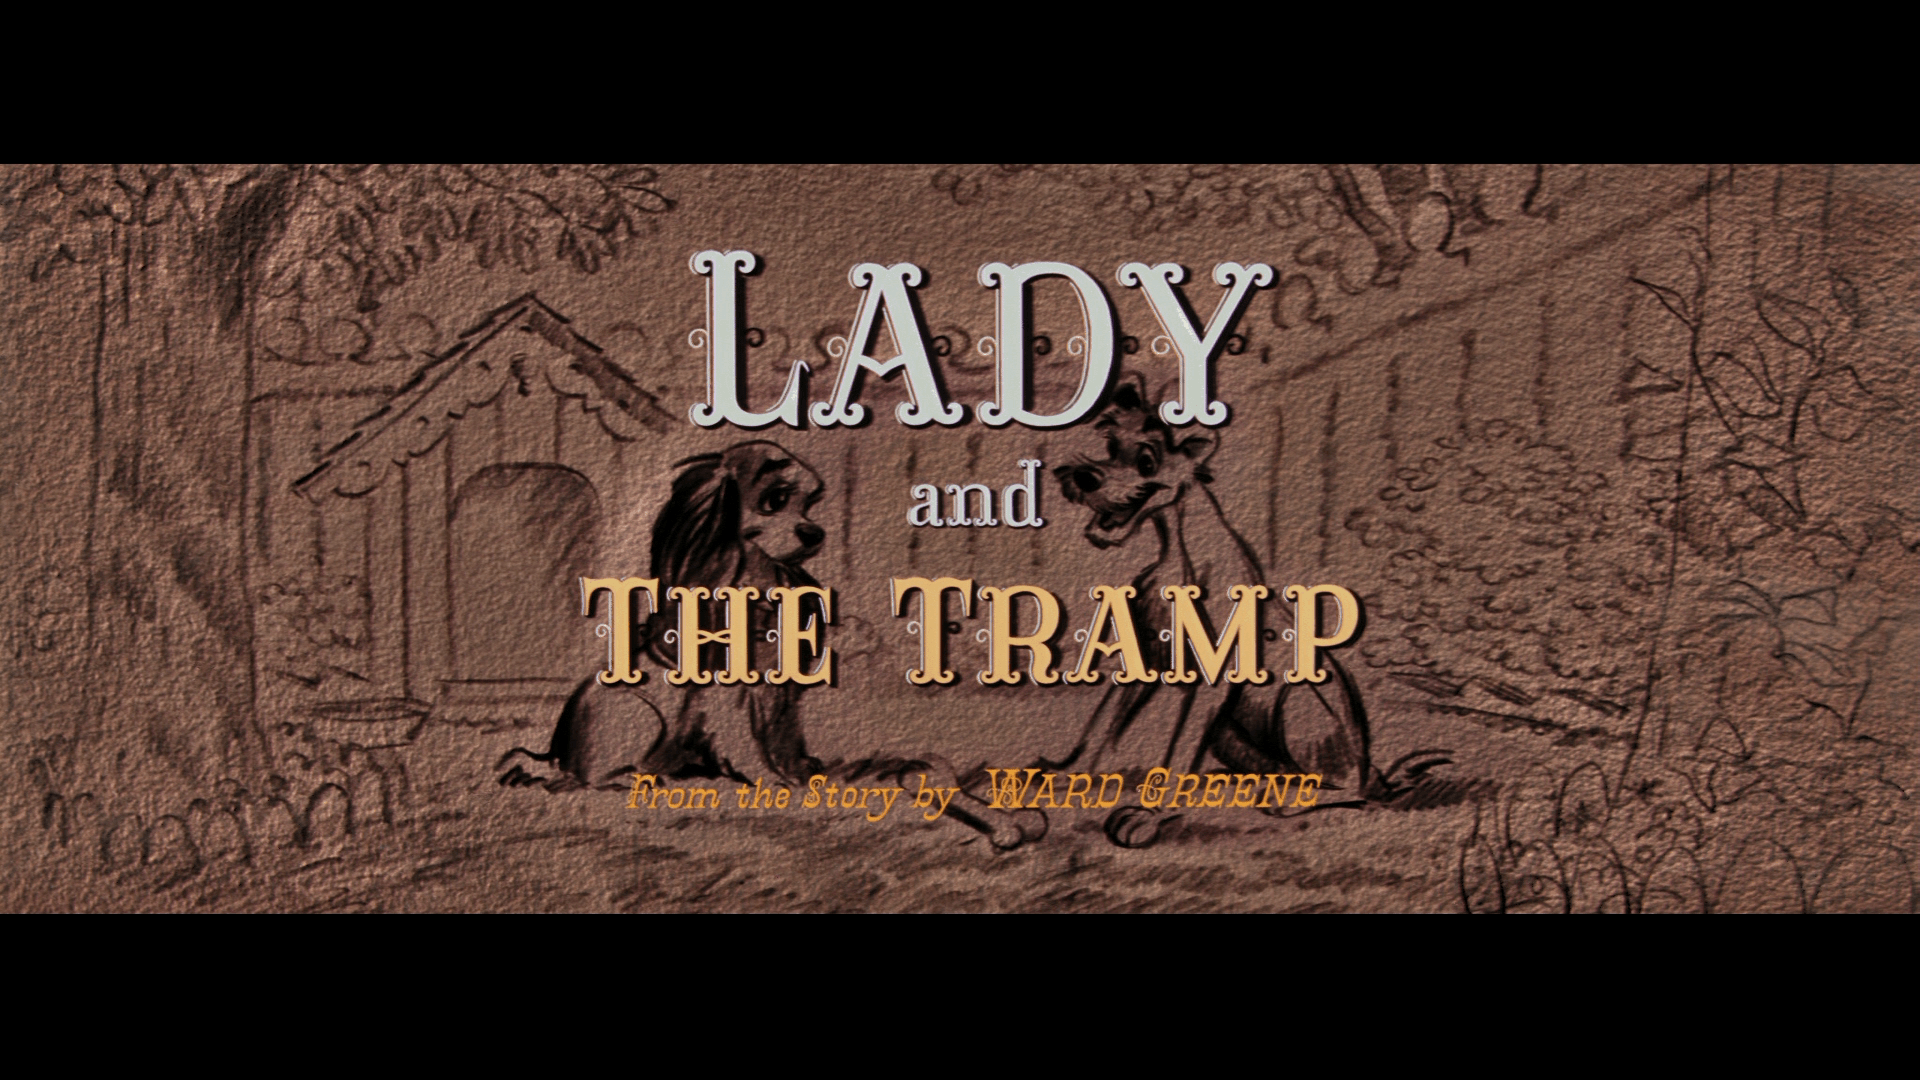 Lady and the Tramp Logo - Lady and the Tramp (1955 film) | Logopedia | FANDOM powered by Wikia